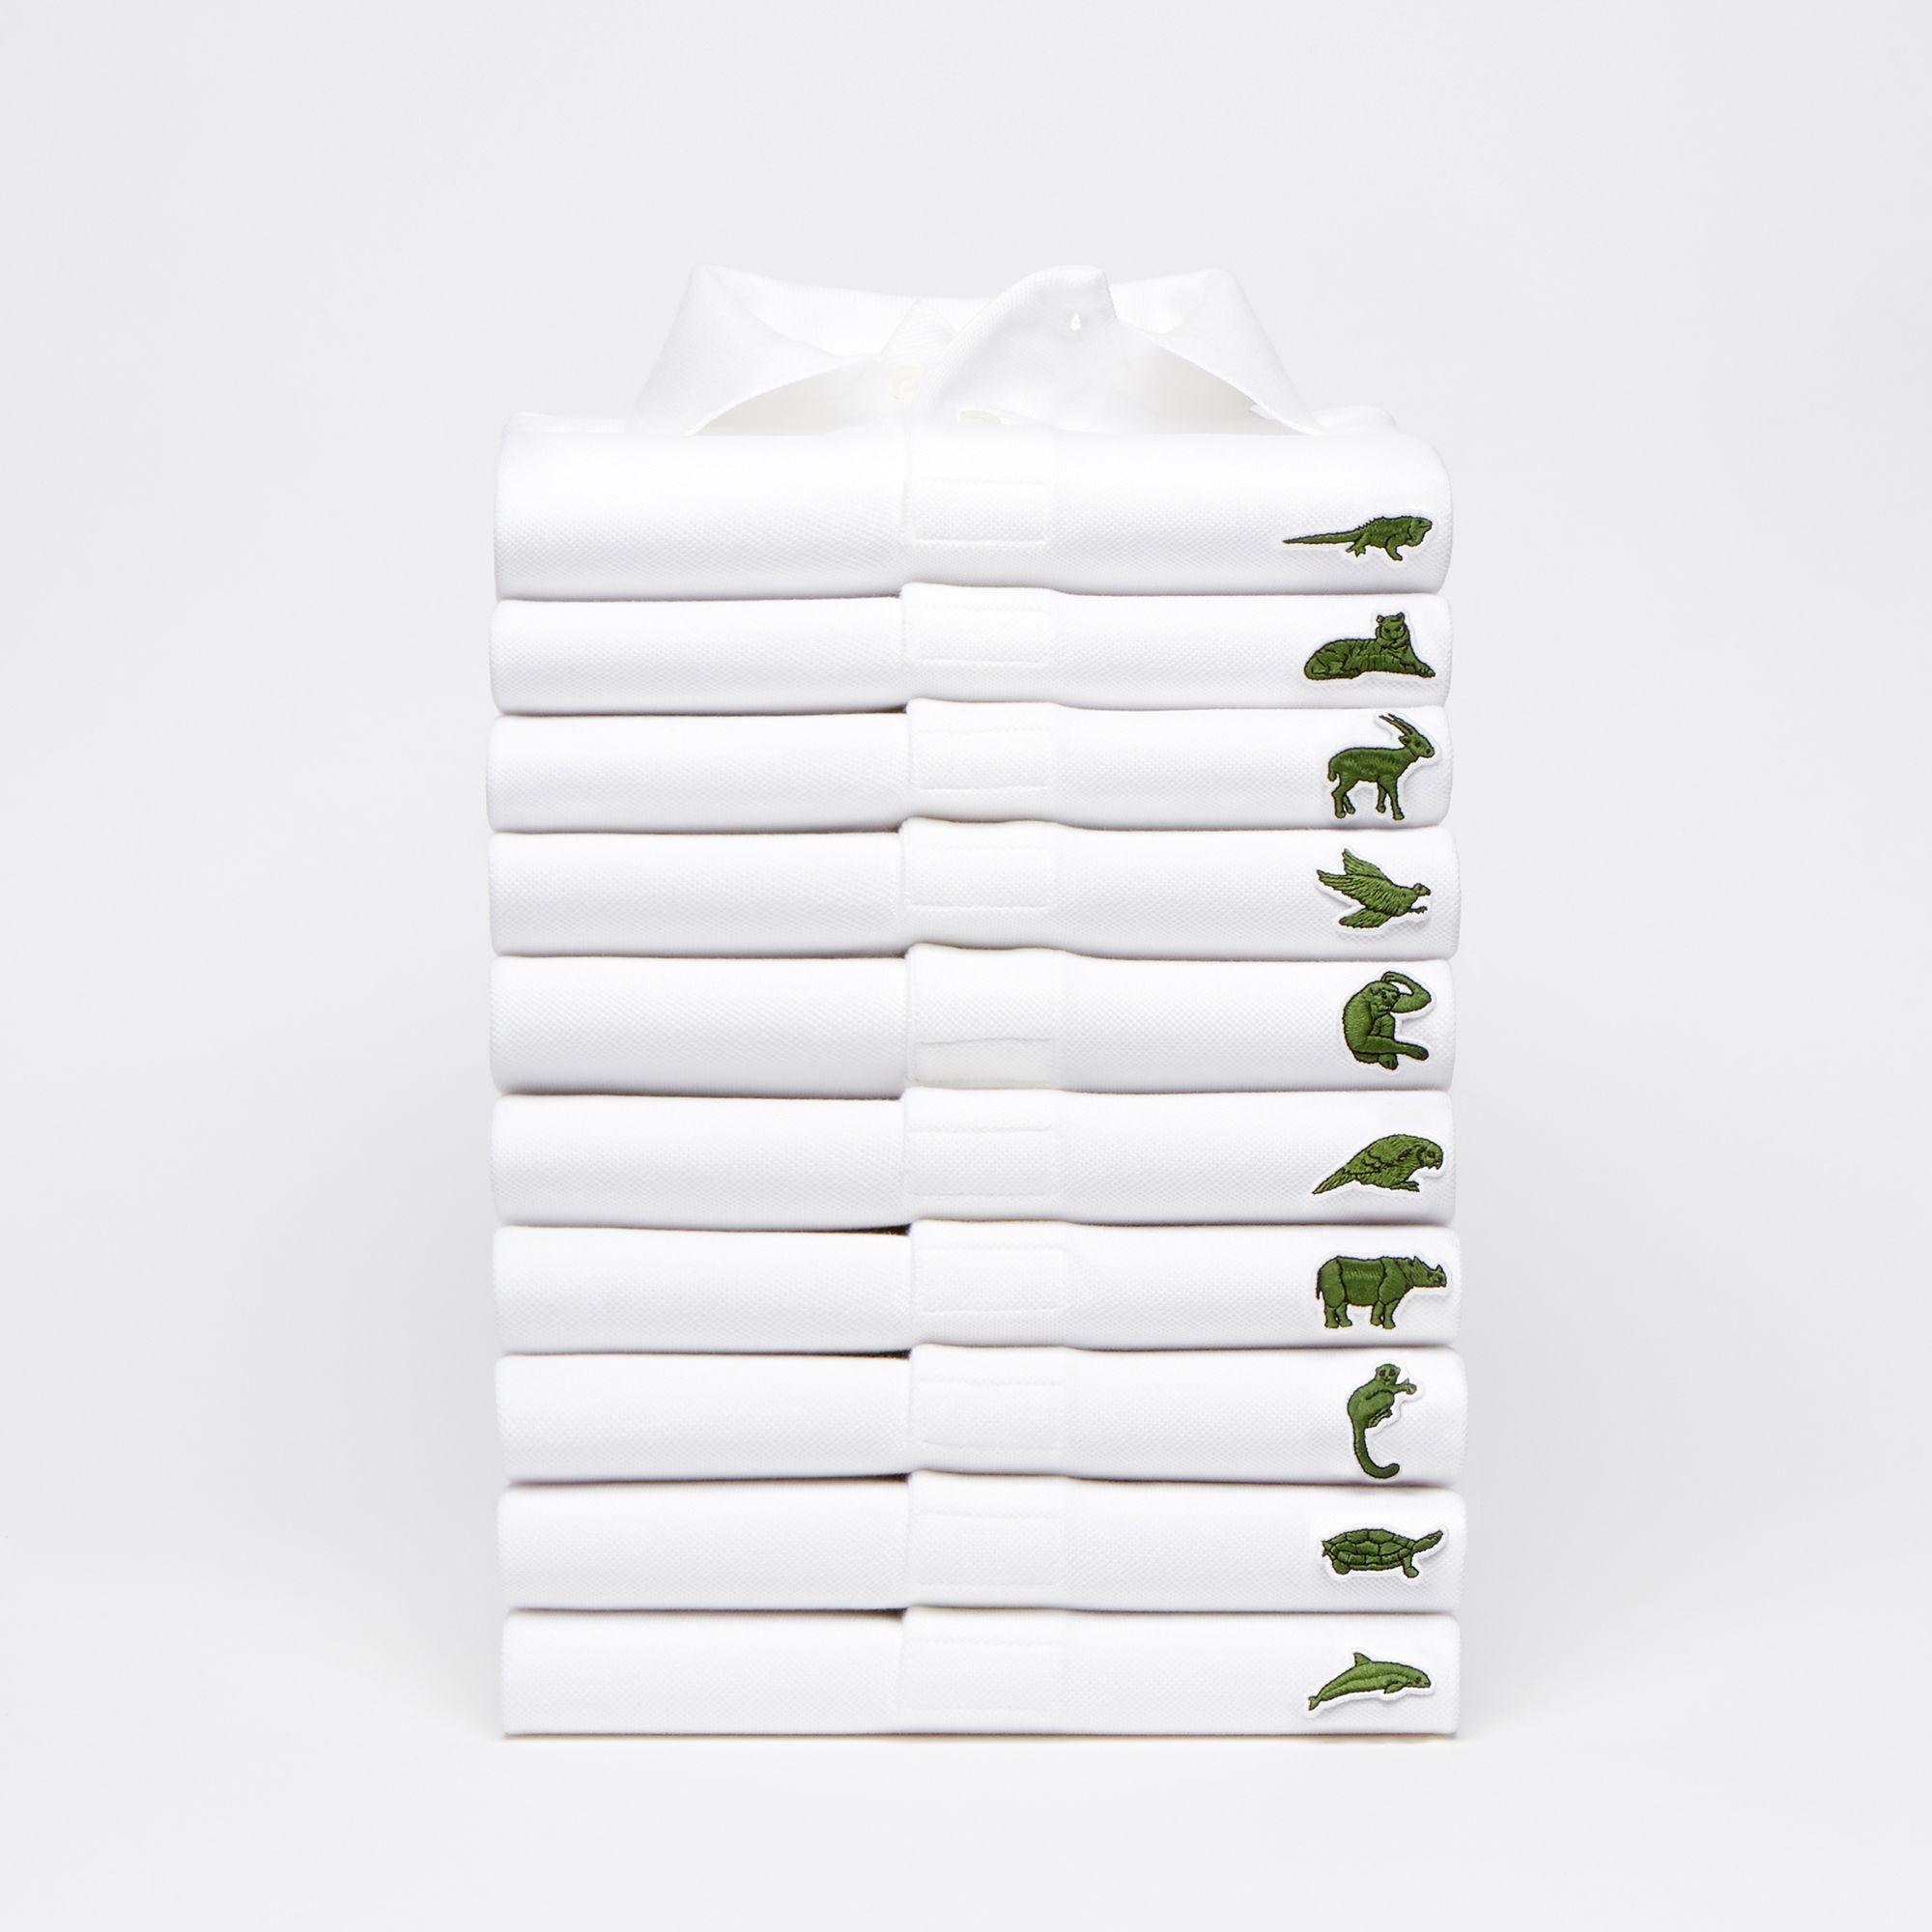 Lacoste Shirt Logo - Lacoste replaces crocodile logo for limited edition range